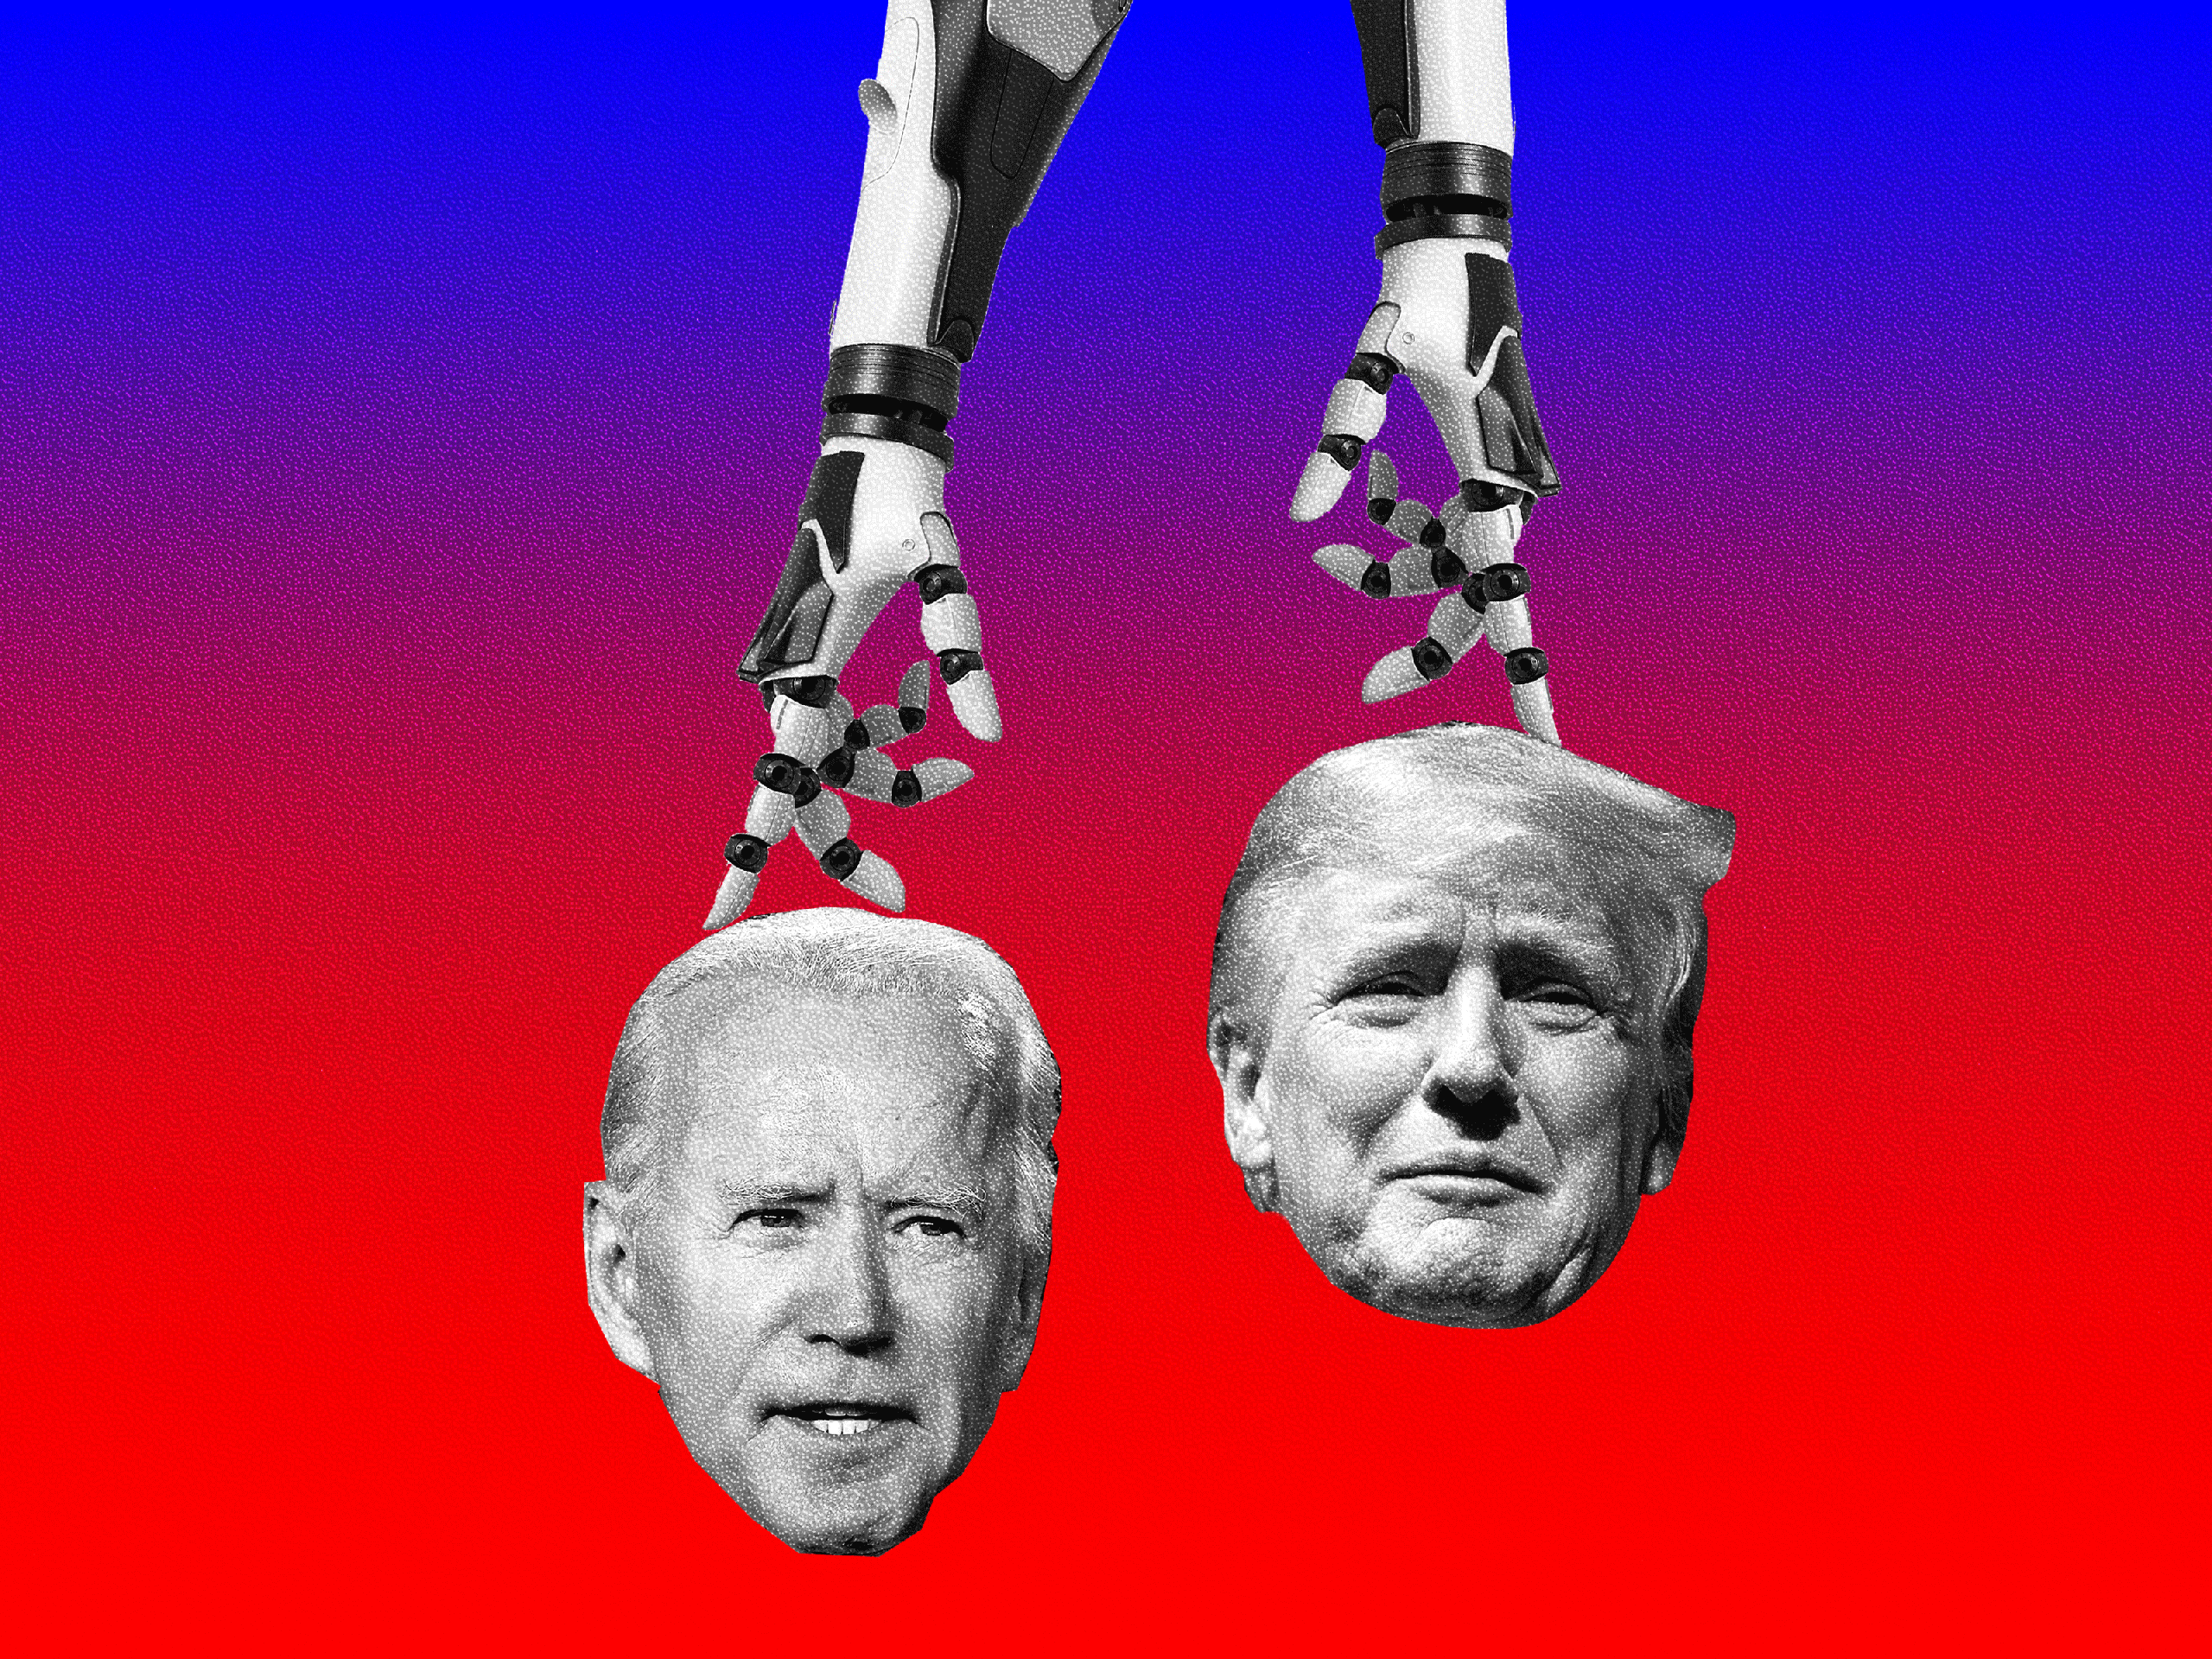 Two robotic arms pushing cut outs of Joe Biden and Donald Trump's faces.